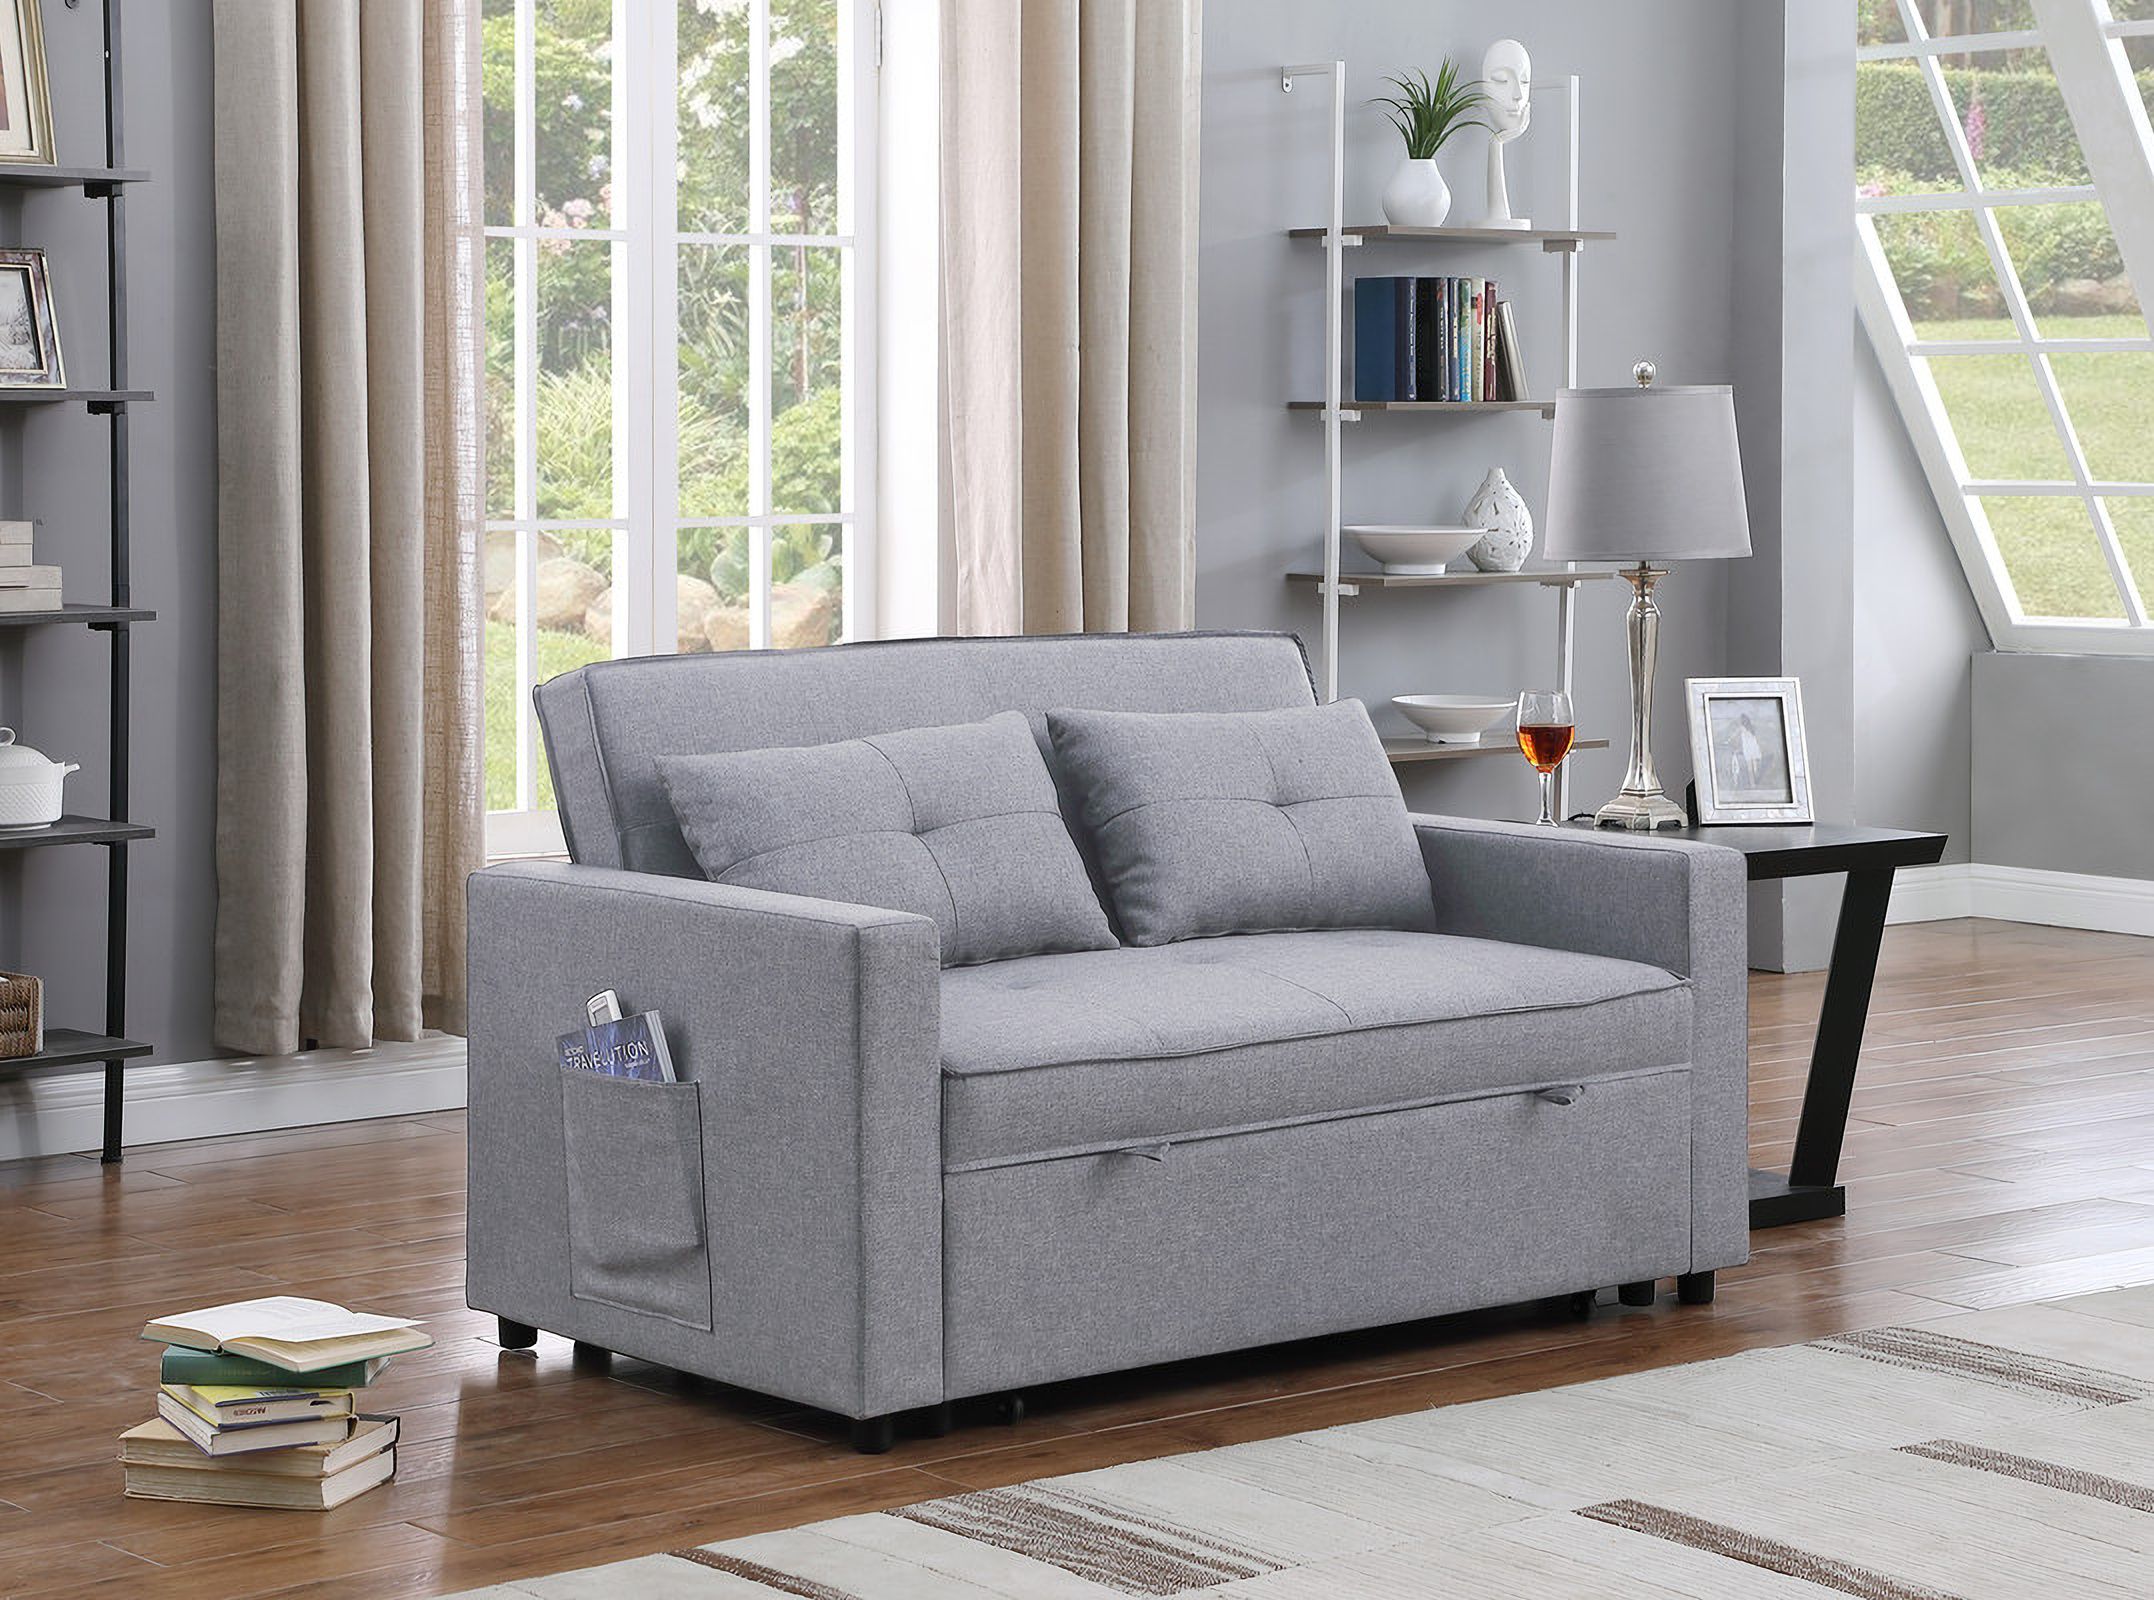 Zoey Light Gray Linen Convertible Sleeper Loveseat With Side Pocket Lilola Home | 1Stopbedrooms Pertaining To Convertible Light Gray Chair Beds (View 4 of 15)